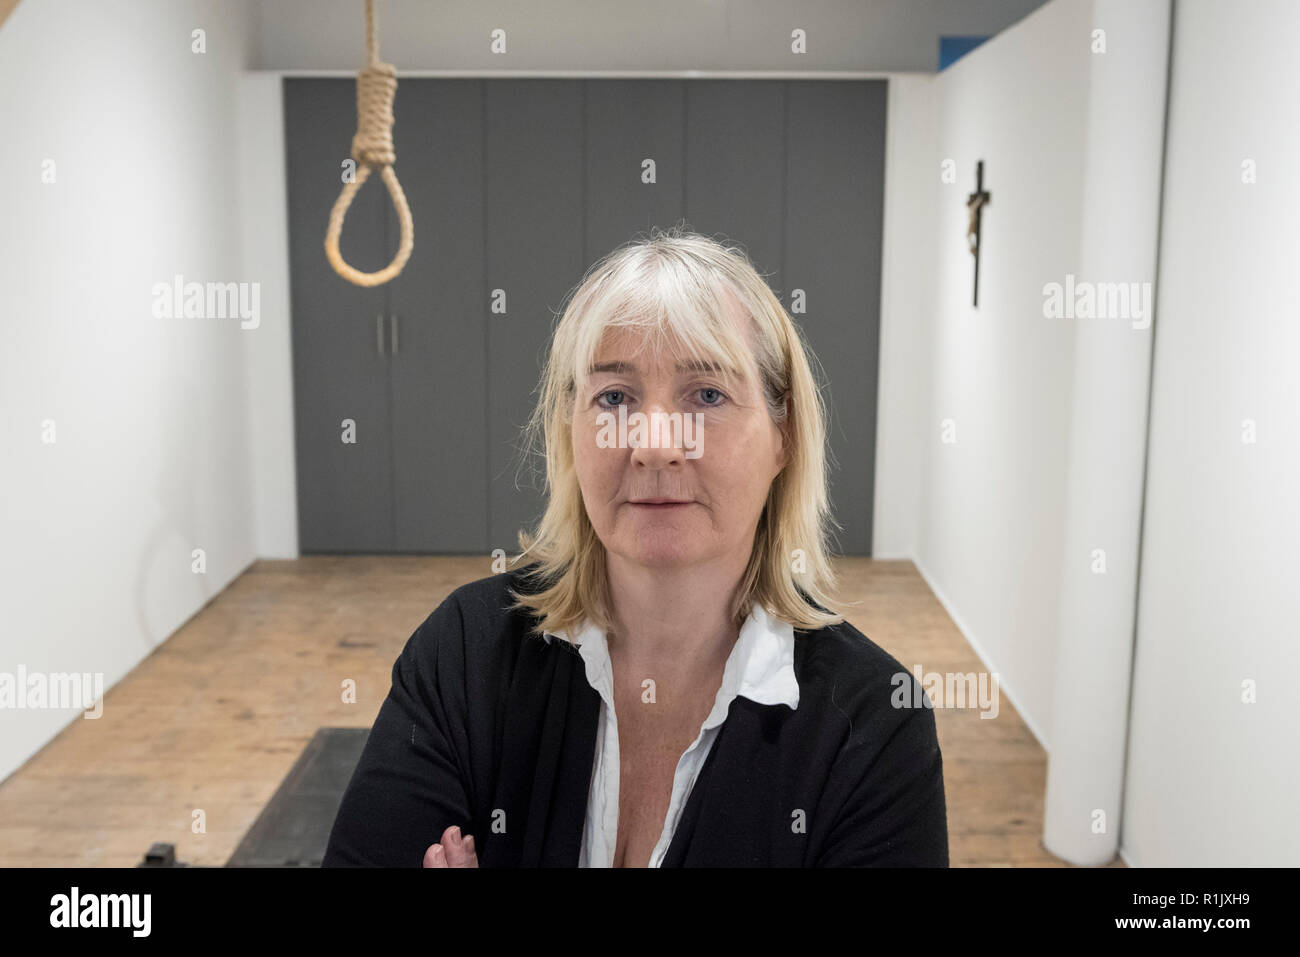 London, UK.  13 November 2018. Artist Christina Reihill poses with a hangman's noose.  Preview of 'Glad I Did It', a new work by Irish artist Christina Reihill at Bermondsey Project Space.  The interactive artwork looks at the life and death of Ruth Ellis, the last woman to be hanged in Britain, after she shot her lover, racing driver, David Blakely in 1955.  On display are the artist's interpretation of Ruth Ellis' prison cell, including furniture and props, the hanging room together with a video display of the artist in conversation. Credit: Stephen Chung/Alamy Live News Stock Photo